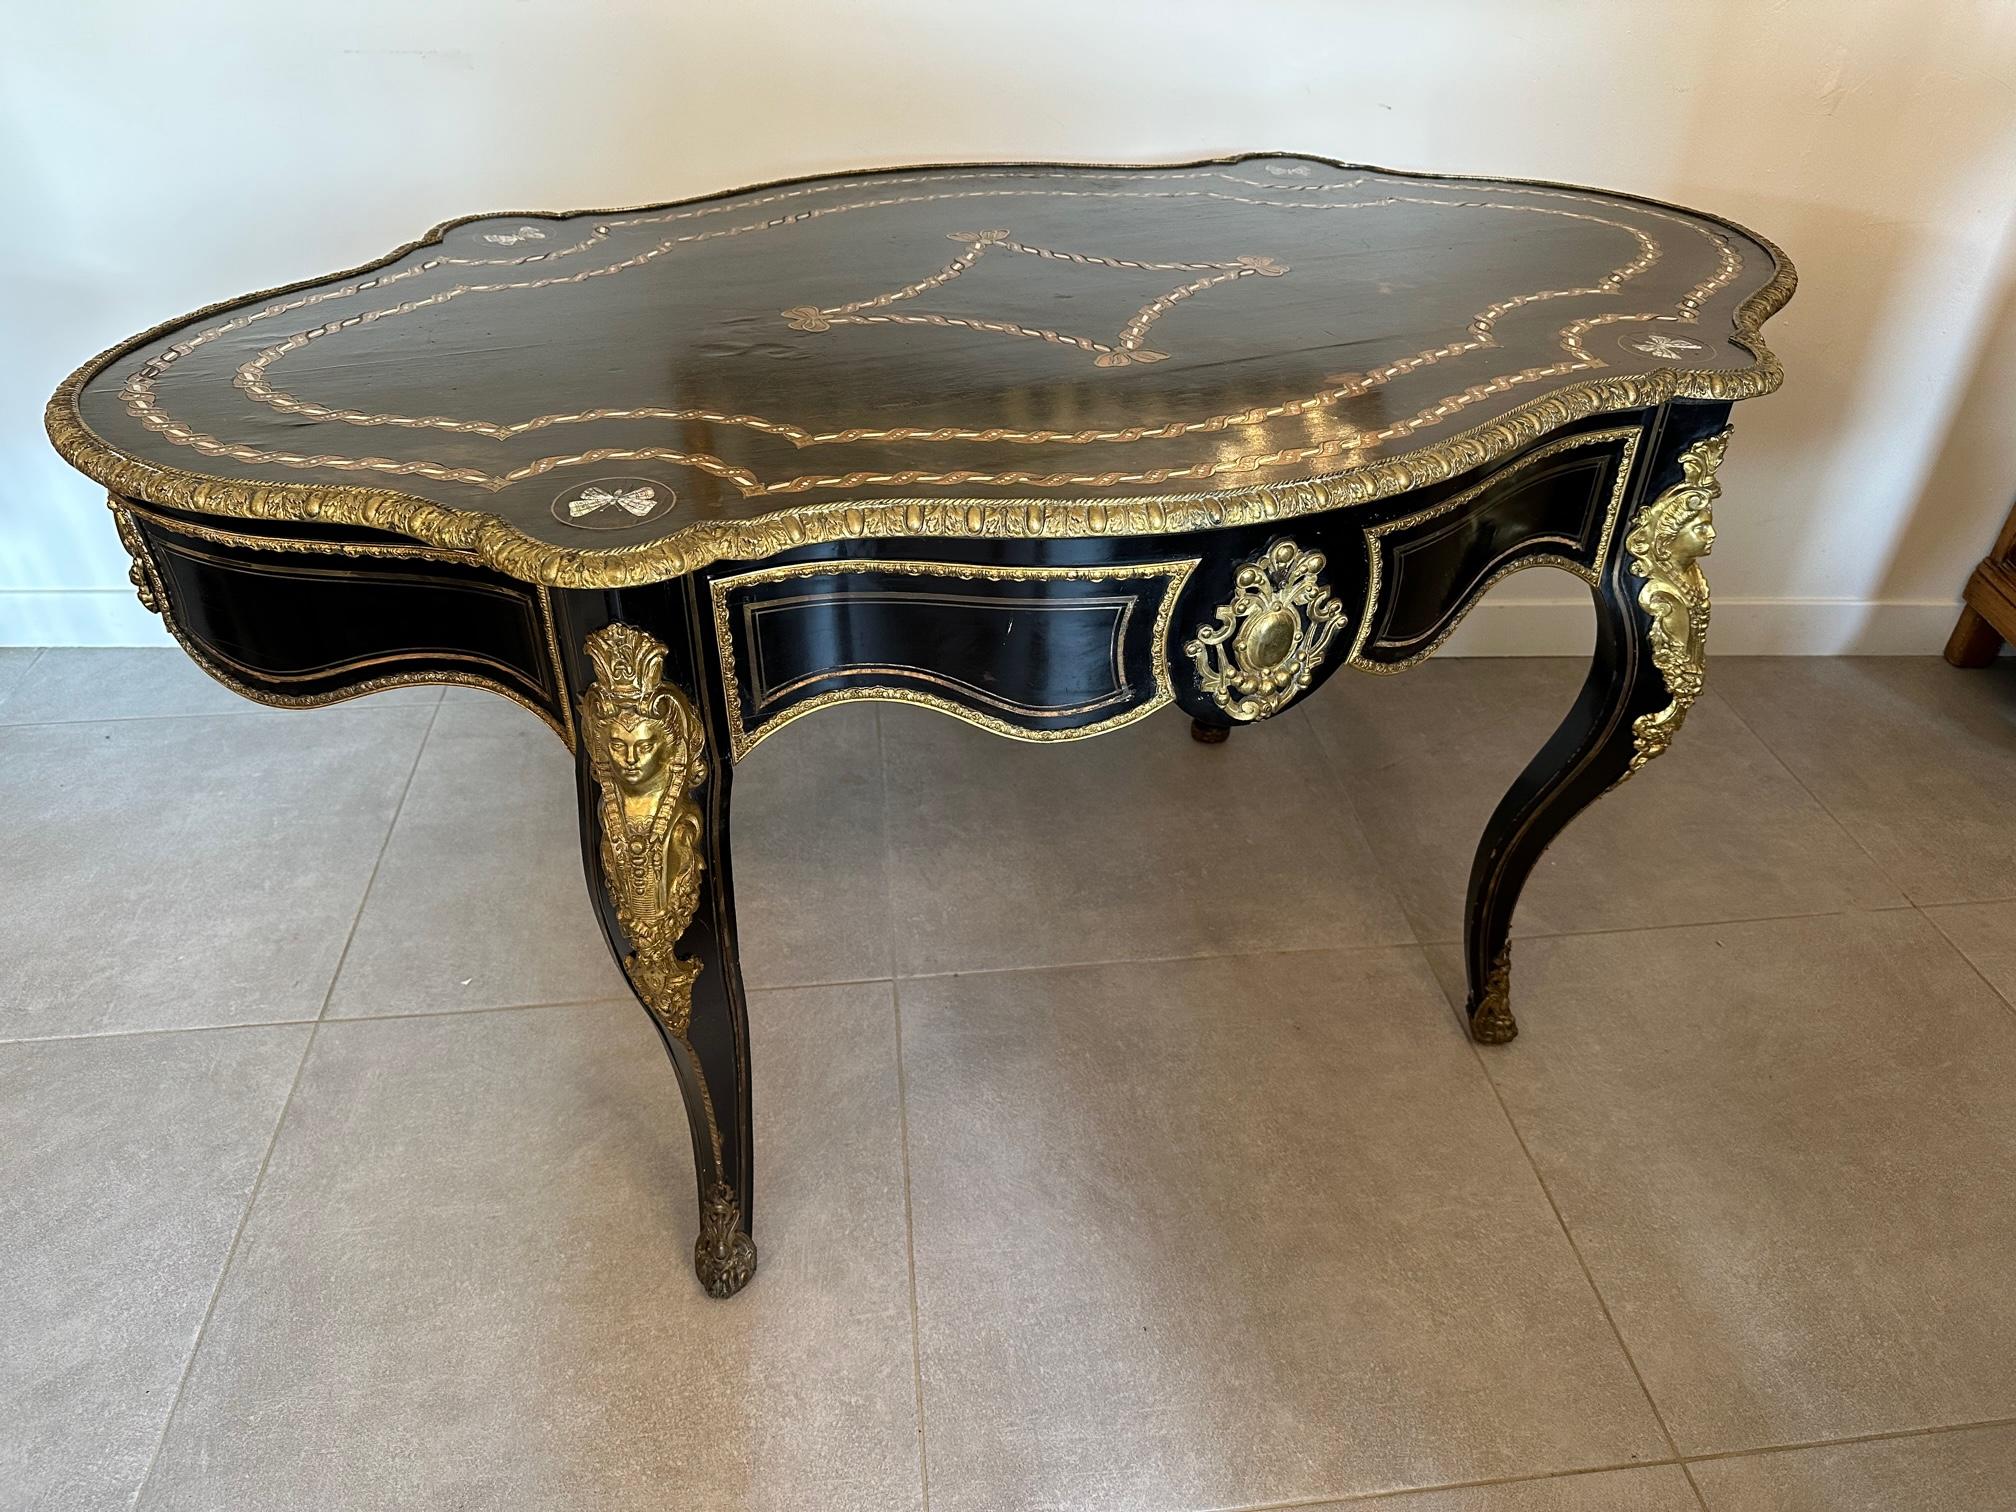 Very beautiful Napoleon III desk in blackened pear wood and bronze inlay. Encrusted mother-of-pearl butterflies. Bronze fitting representing caryatids.
Large central drawer. A few places to restore (see detailed photos) magnificent quality, rare